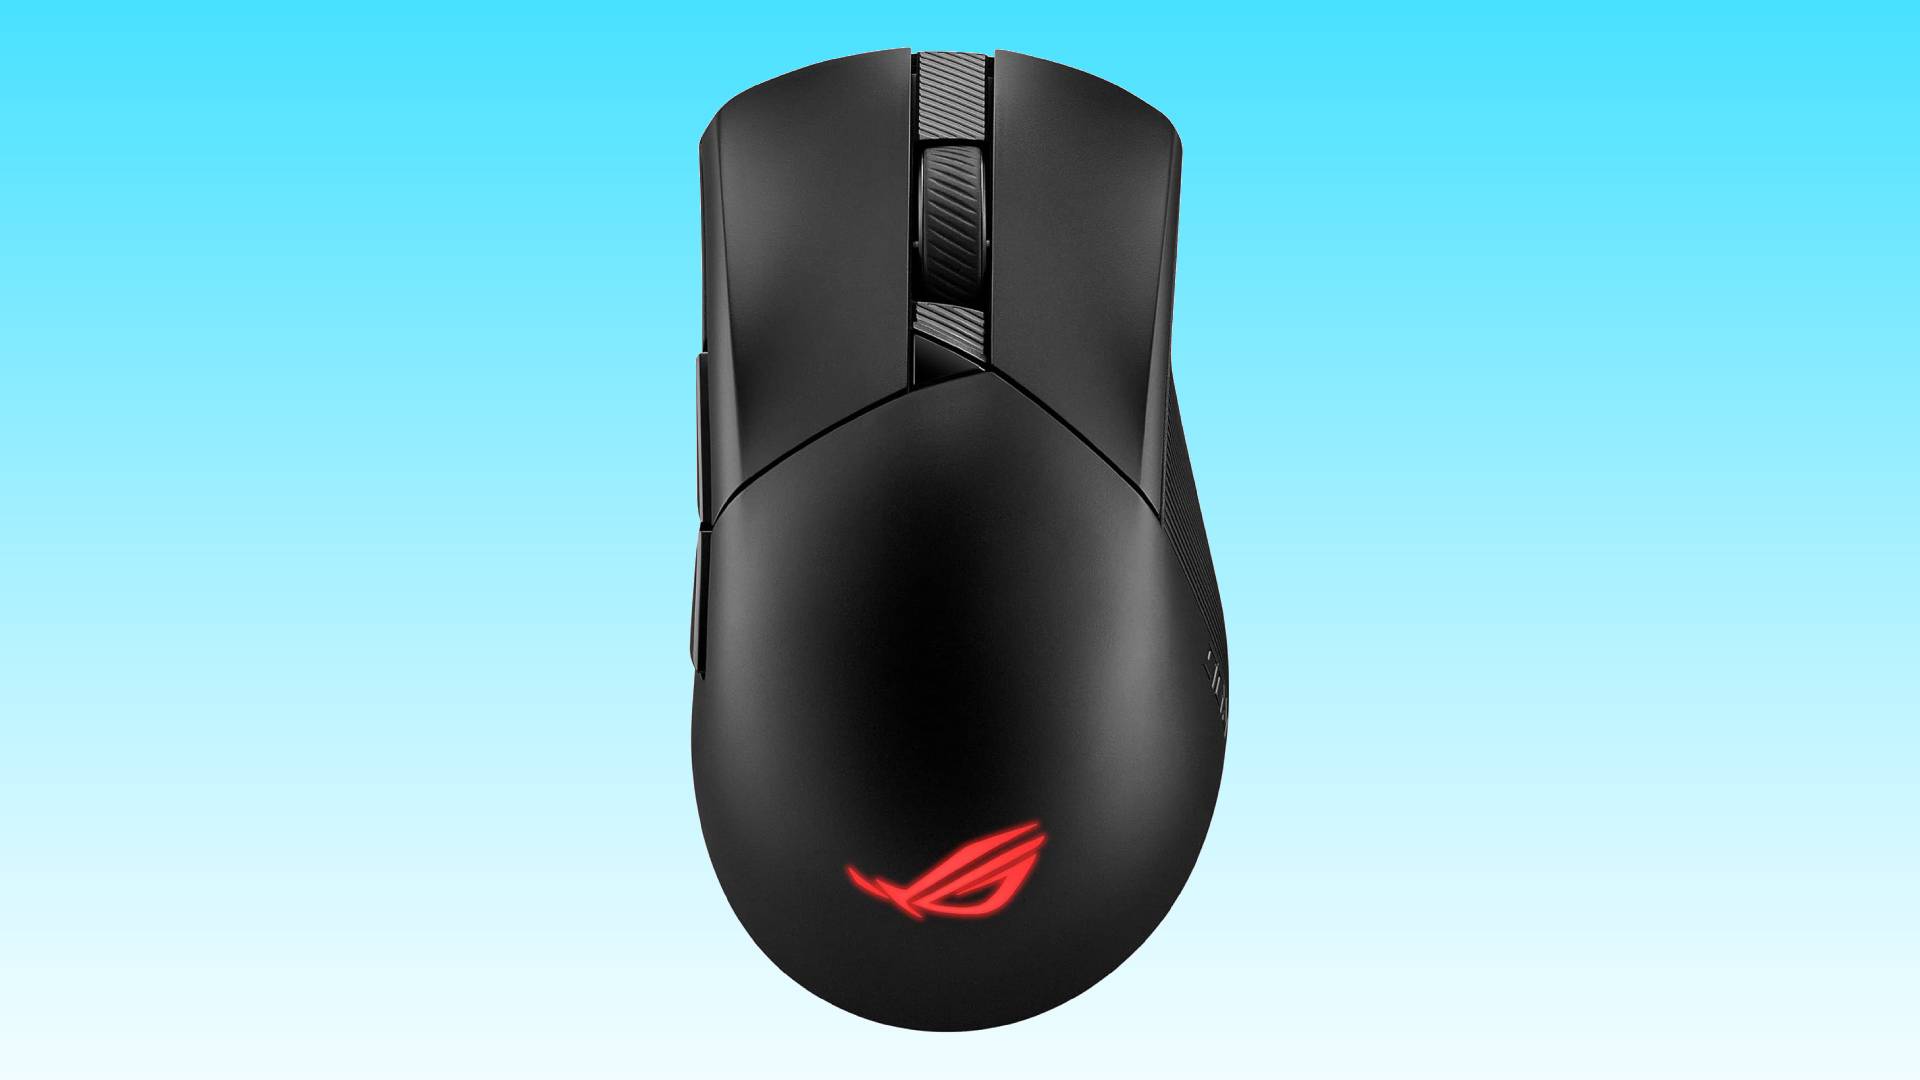 ASUS black wireless gaming mouse against a blue background, perfect for competitive gaming.